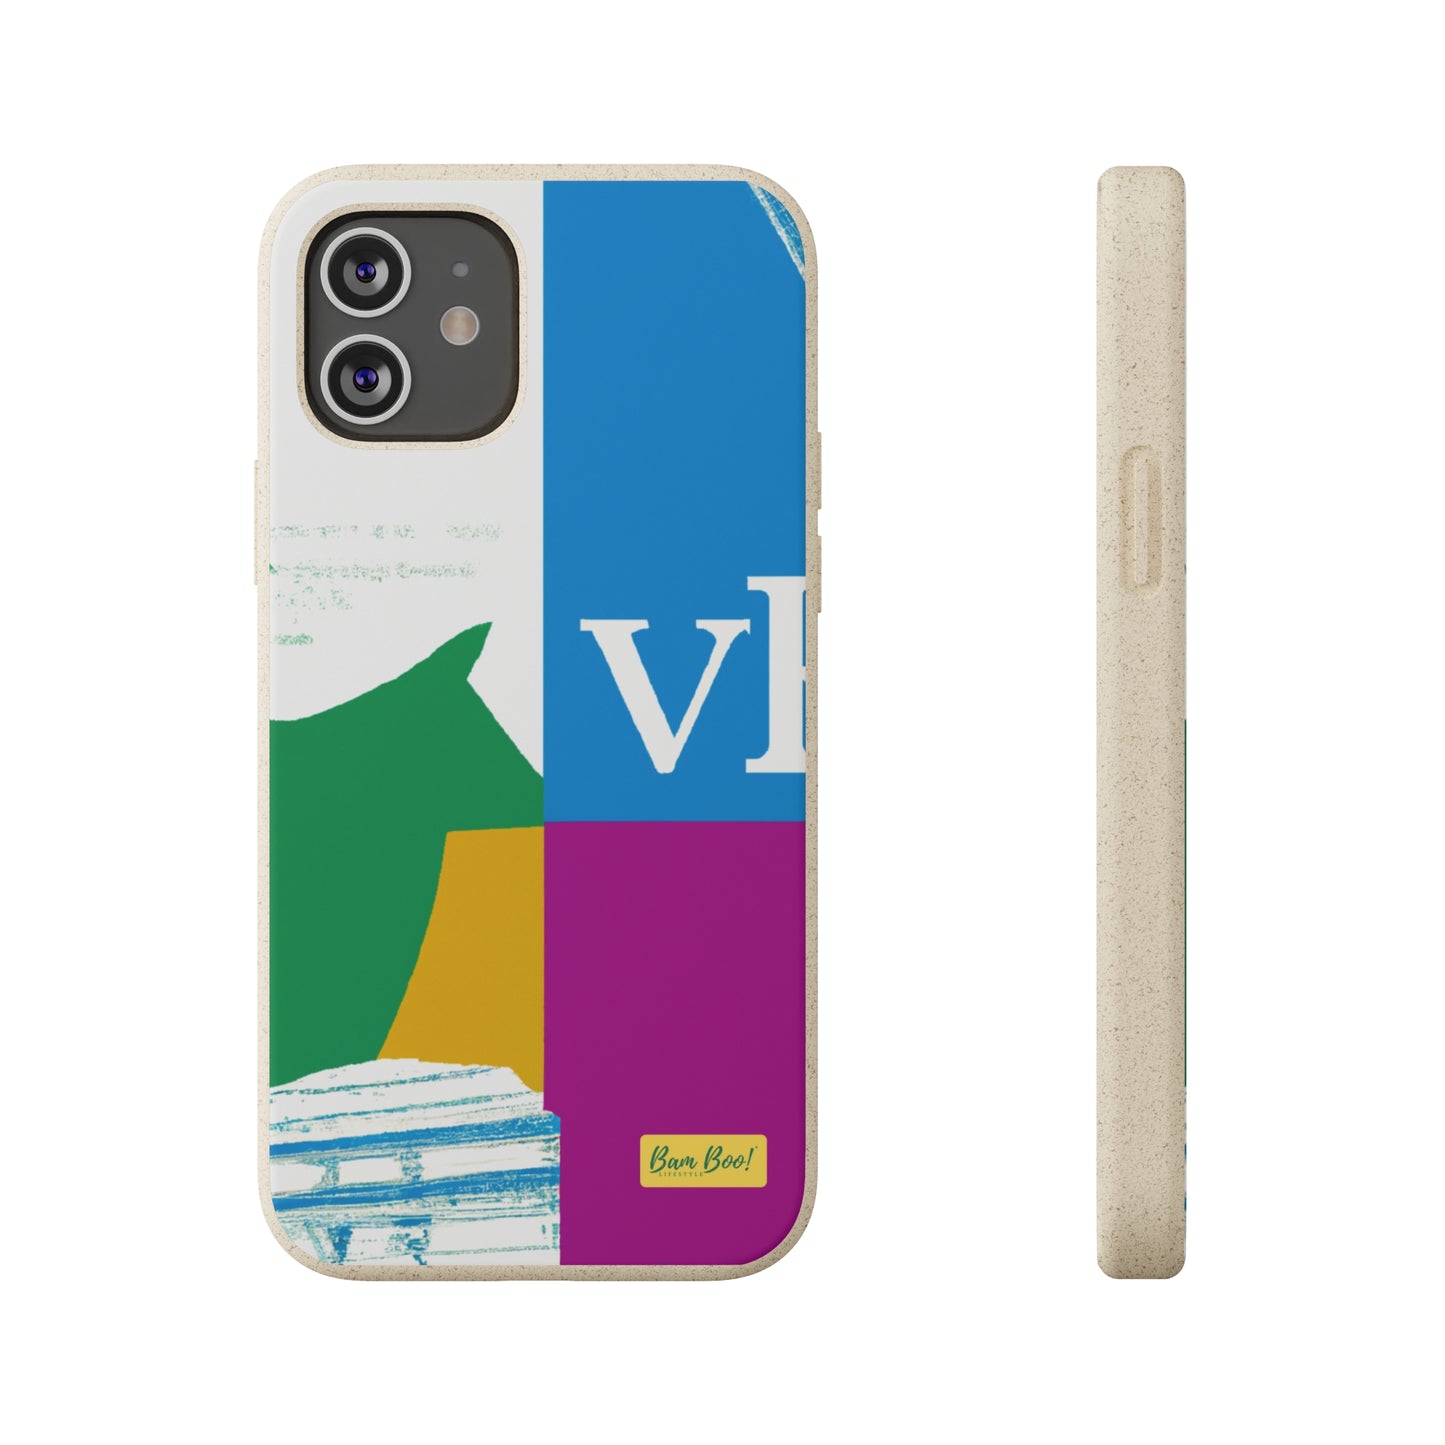 "A Unique View of the World: Creating a Digital Collage" - Bam Boo! Lifestyle Eco-friendly Cases